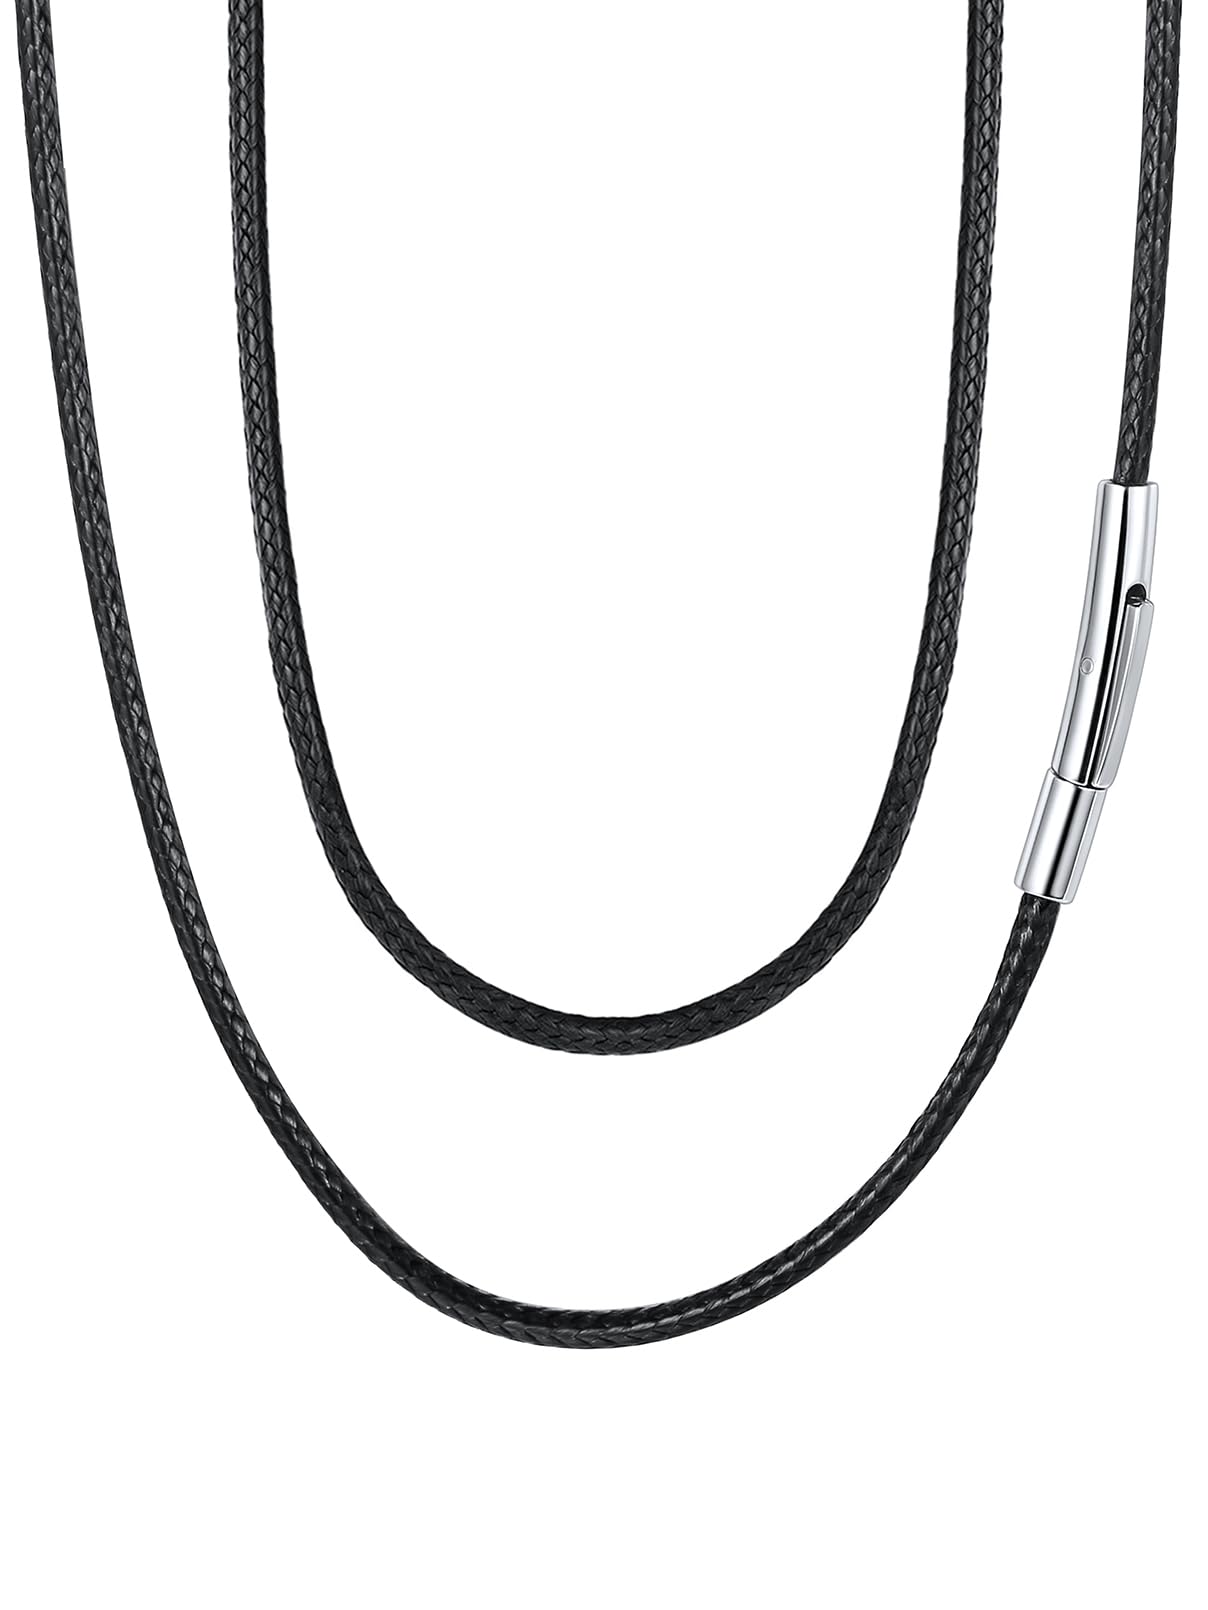 FaithHeart Braided Leather 2MM/3MM Necklace Cord for Men with Stainless Steel Snap Clasp, Waterproof Woven Wax Rope Chain for Pendant with Delicate Gift Box